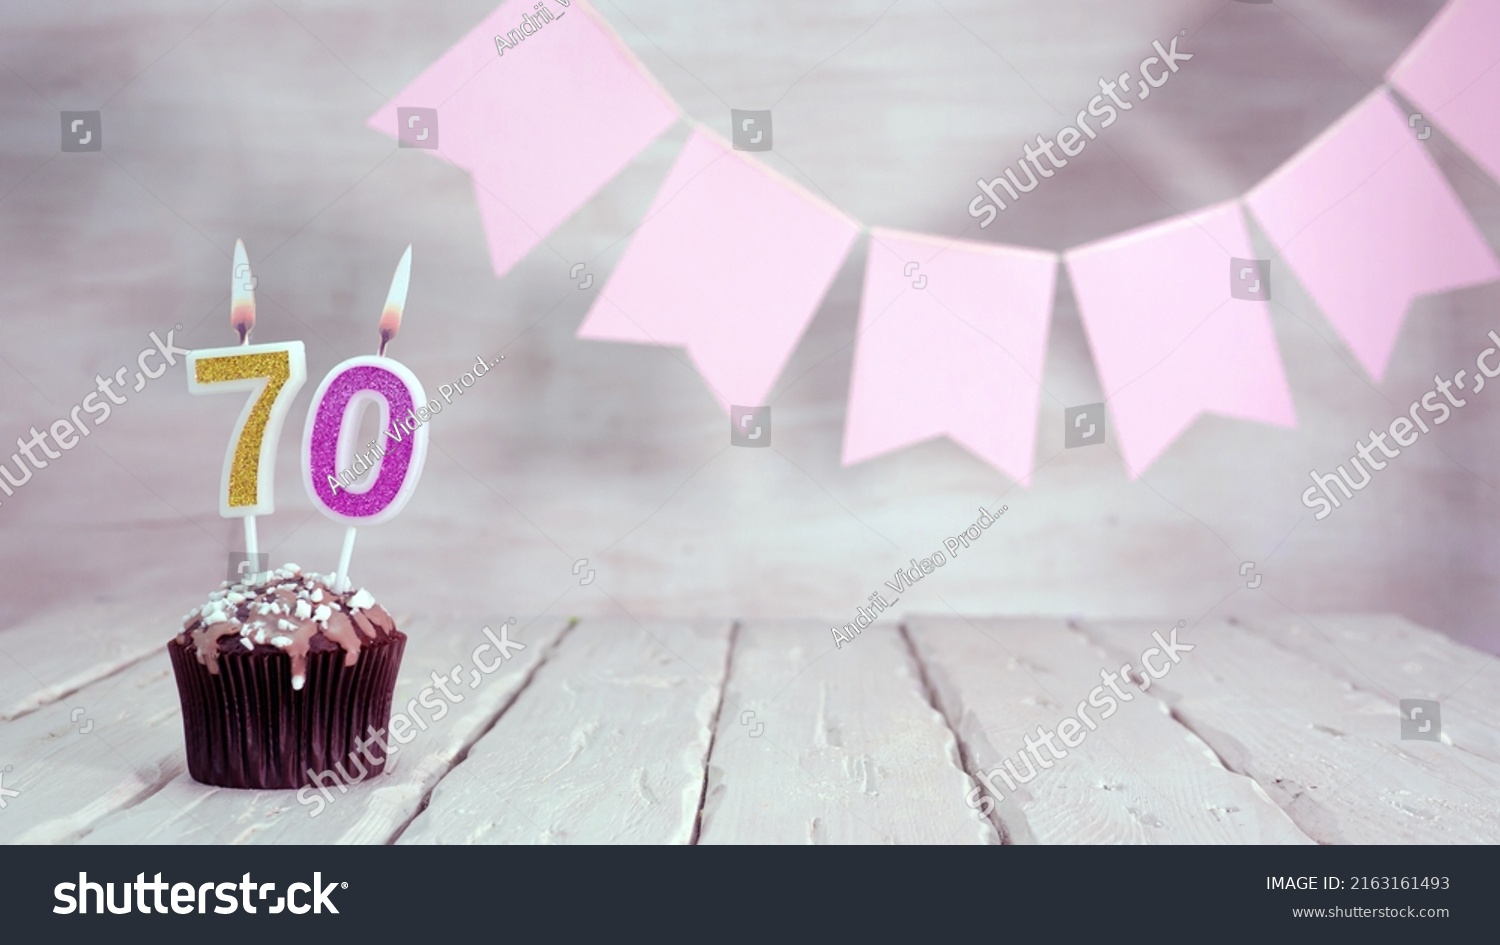 Birthday number 70. Festive background for a girl or woman with a muffin and candles burning pink in pastel colors with decorations for any holiday, copy space, women's gift boxes, place for text. #2163161493